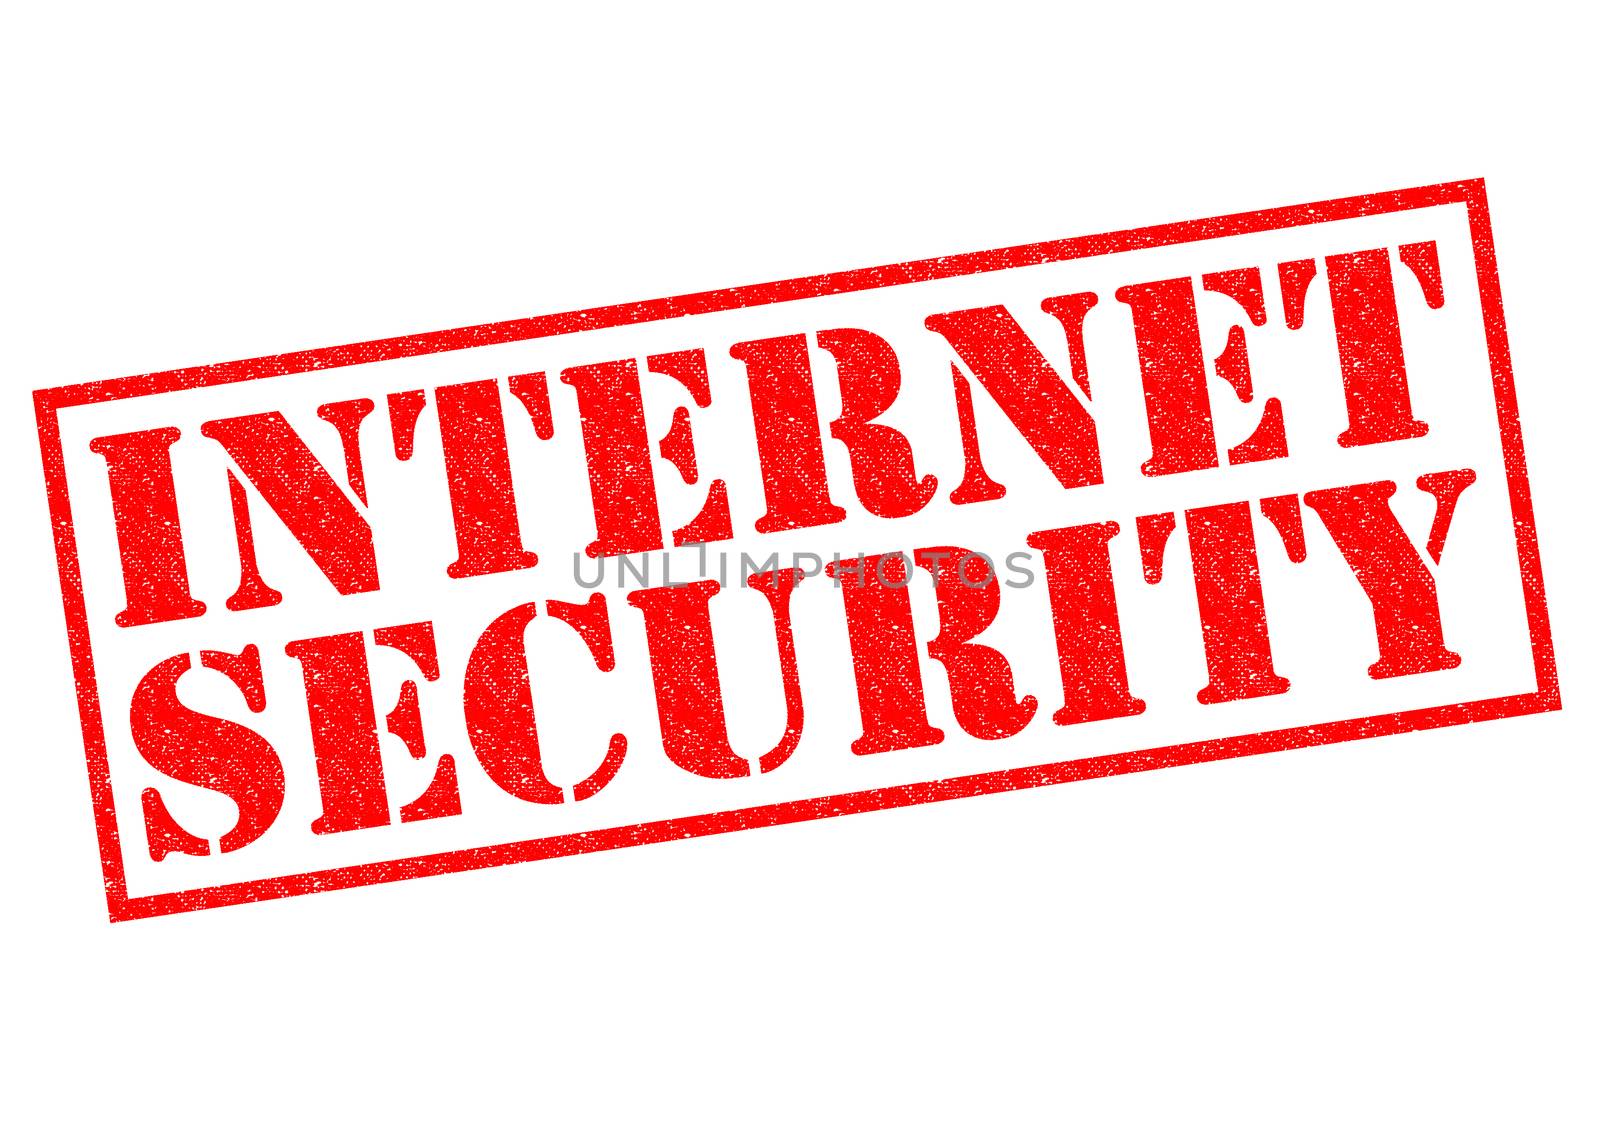 INTERNET SECURITY red Rubber Stamp over a white background.